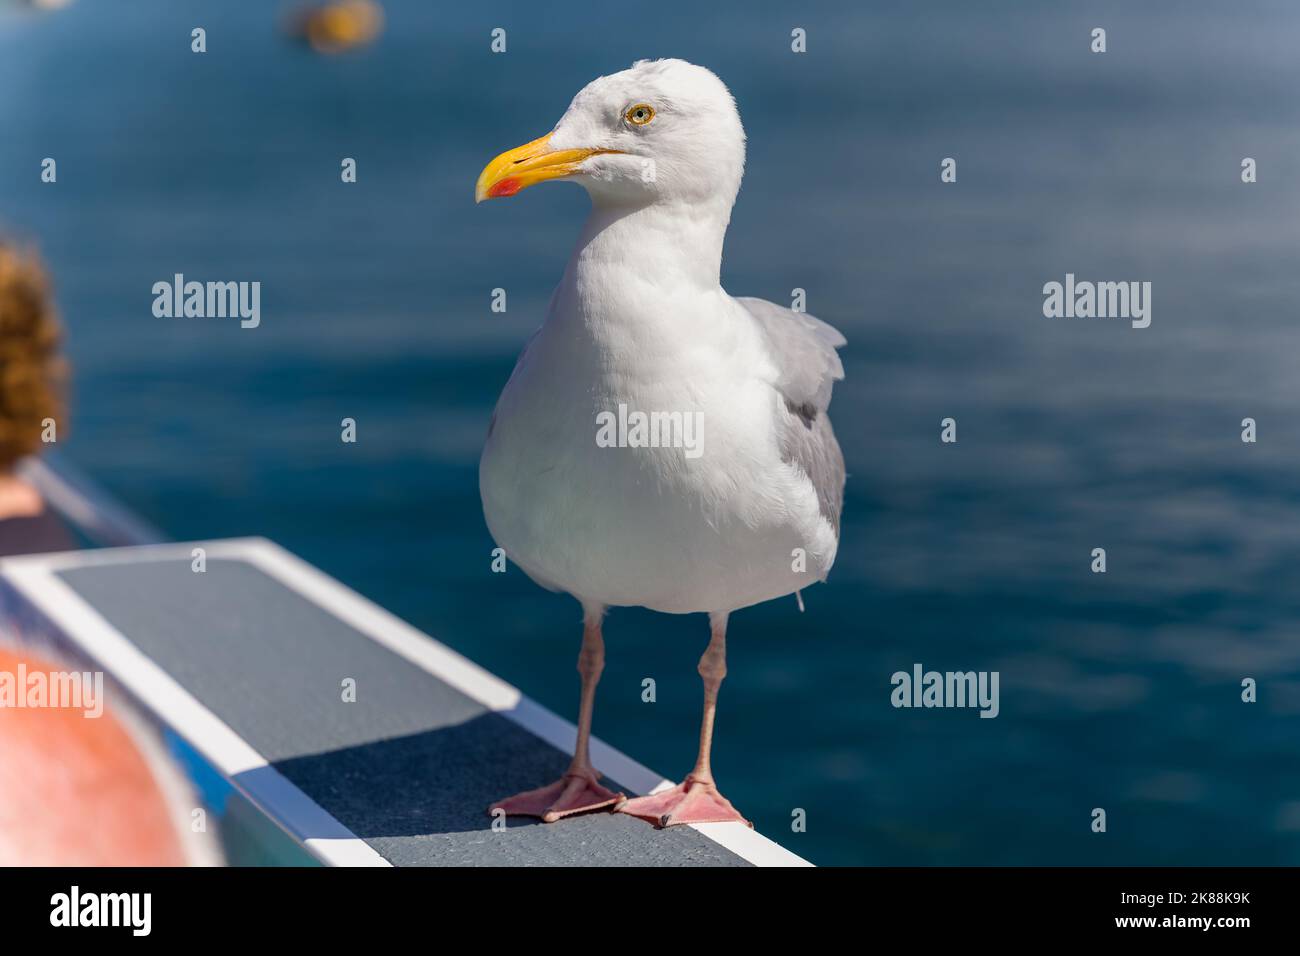 Common Seagull (Herring Gull) perched on a boat in Wales Stock Photo